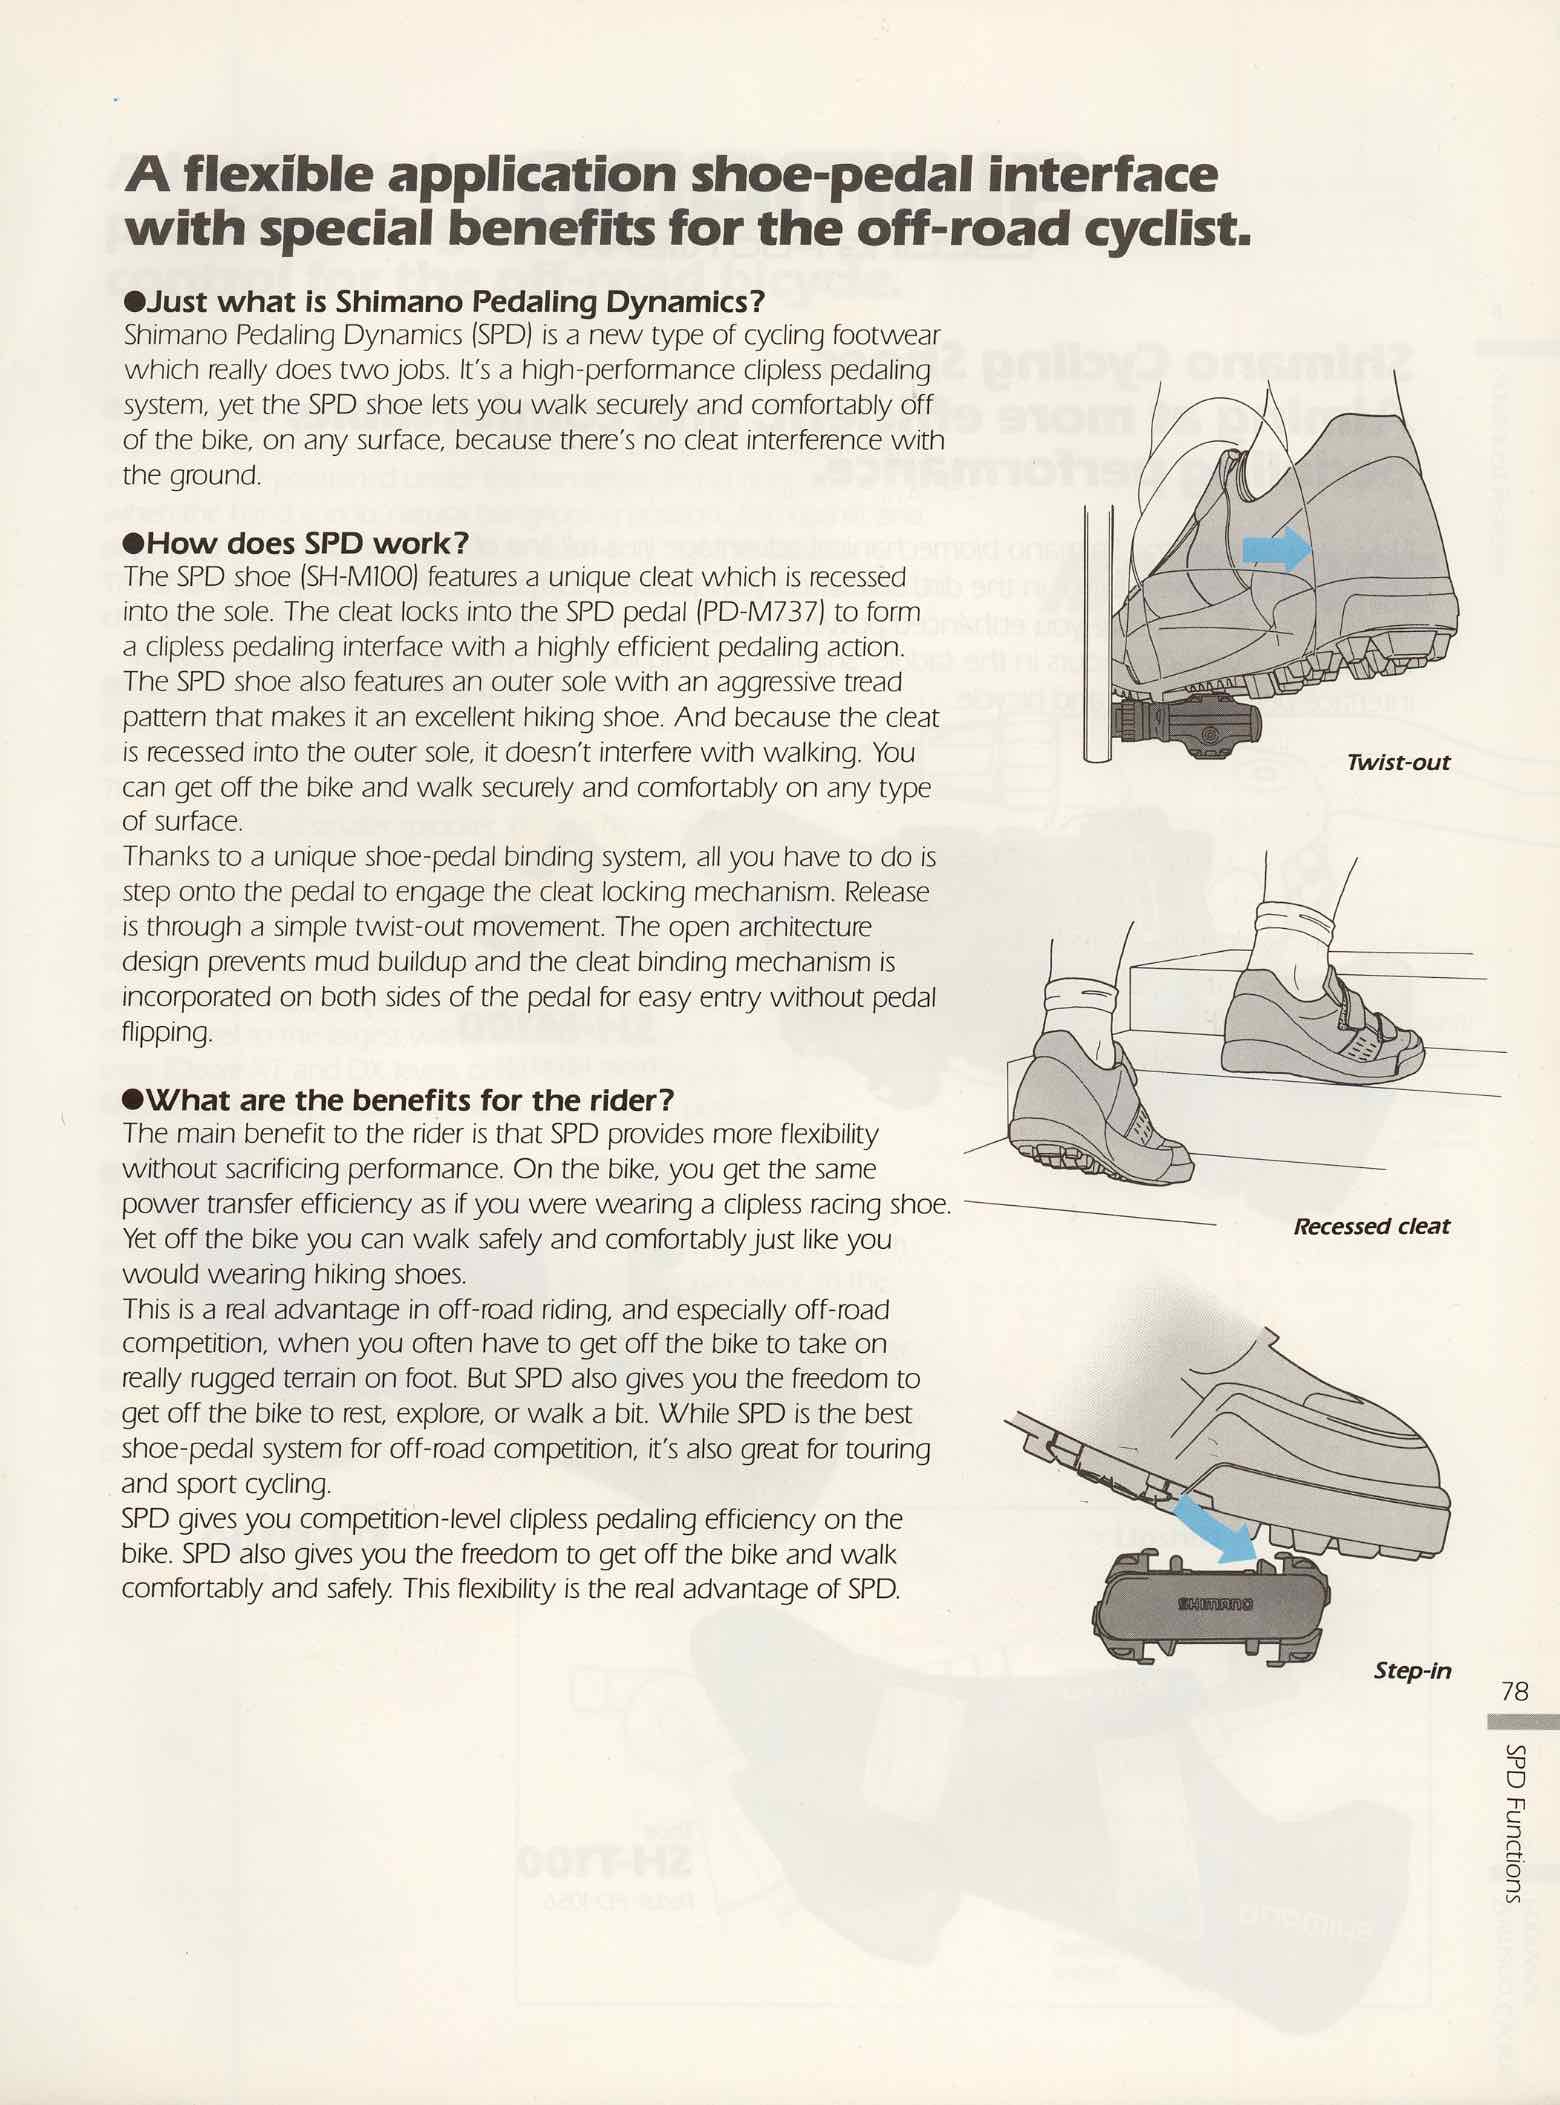 Shimano Bicycle System Component - 91 Page 78 main image